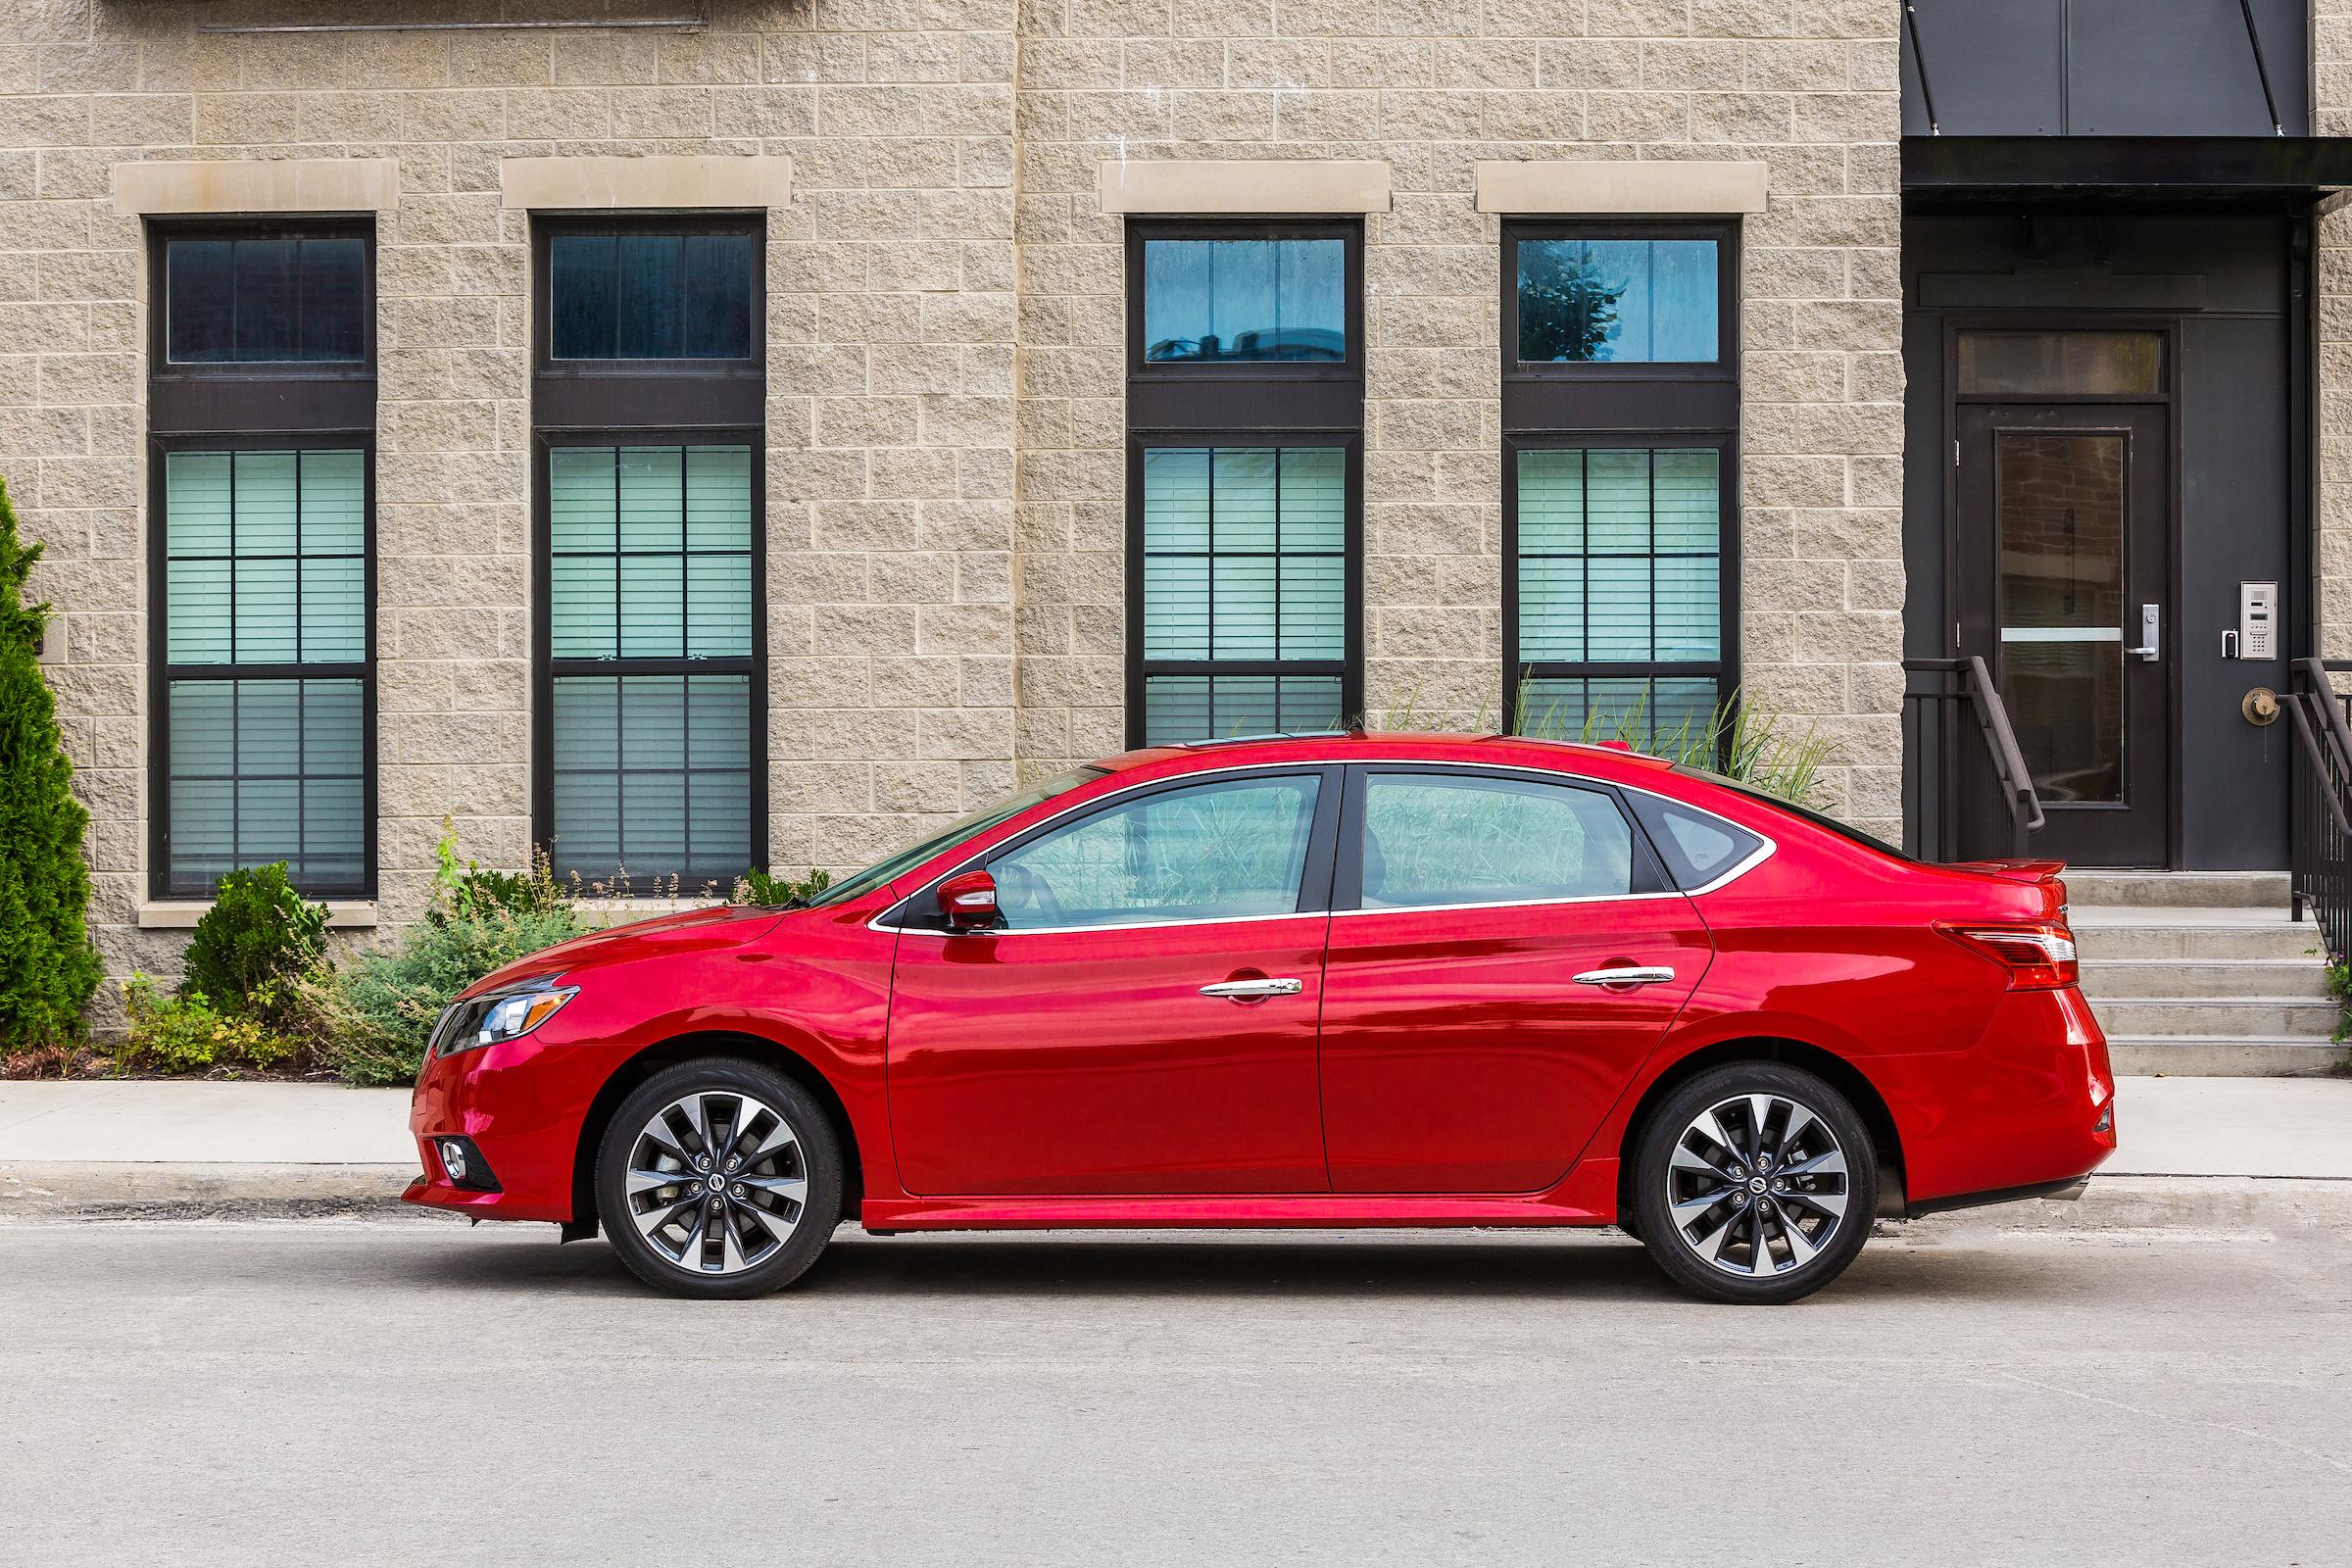 Image of a Nissan Sentra from Nissan's official US Newsroom.